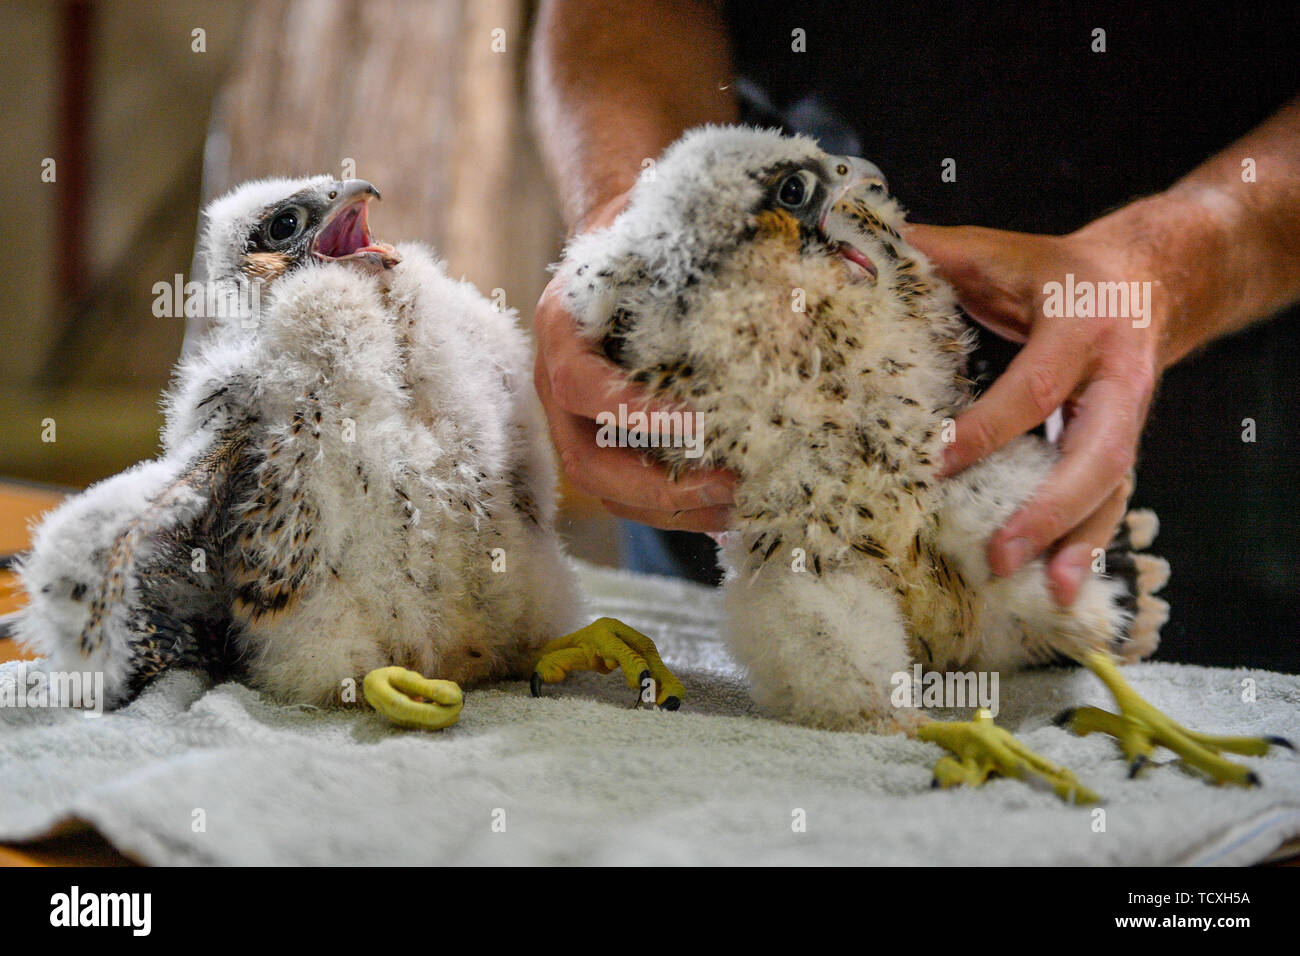 Peregrine falcon chicks are handled in preparation for ringing and data collection by RSPB expert handlers in the tower at Salisbury Cathedral, where four newly hatched birds of prey are nesting along with mum and dad on the South tower. Stock Photo